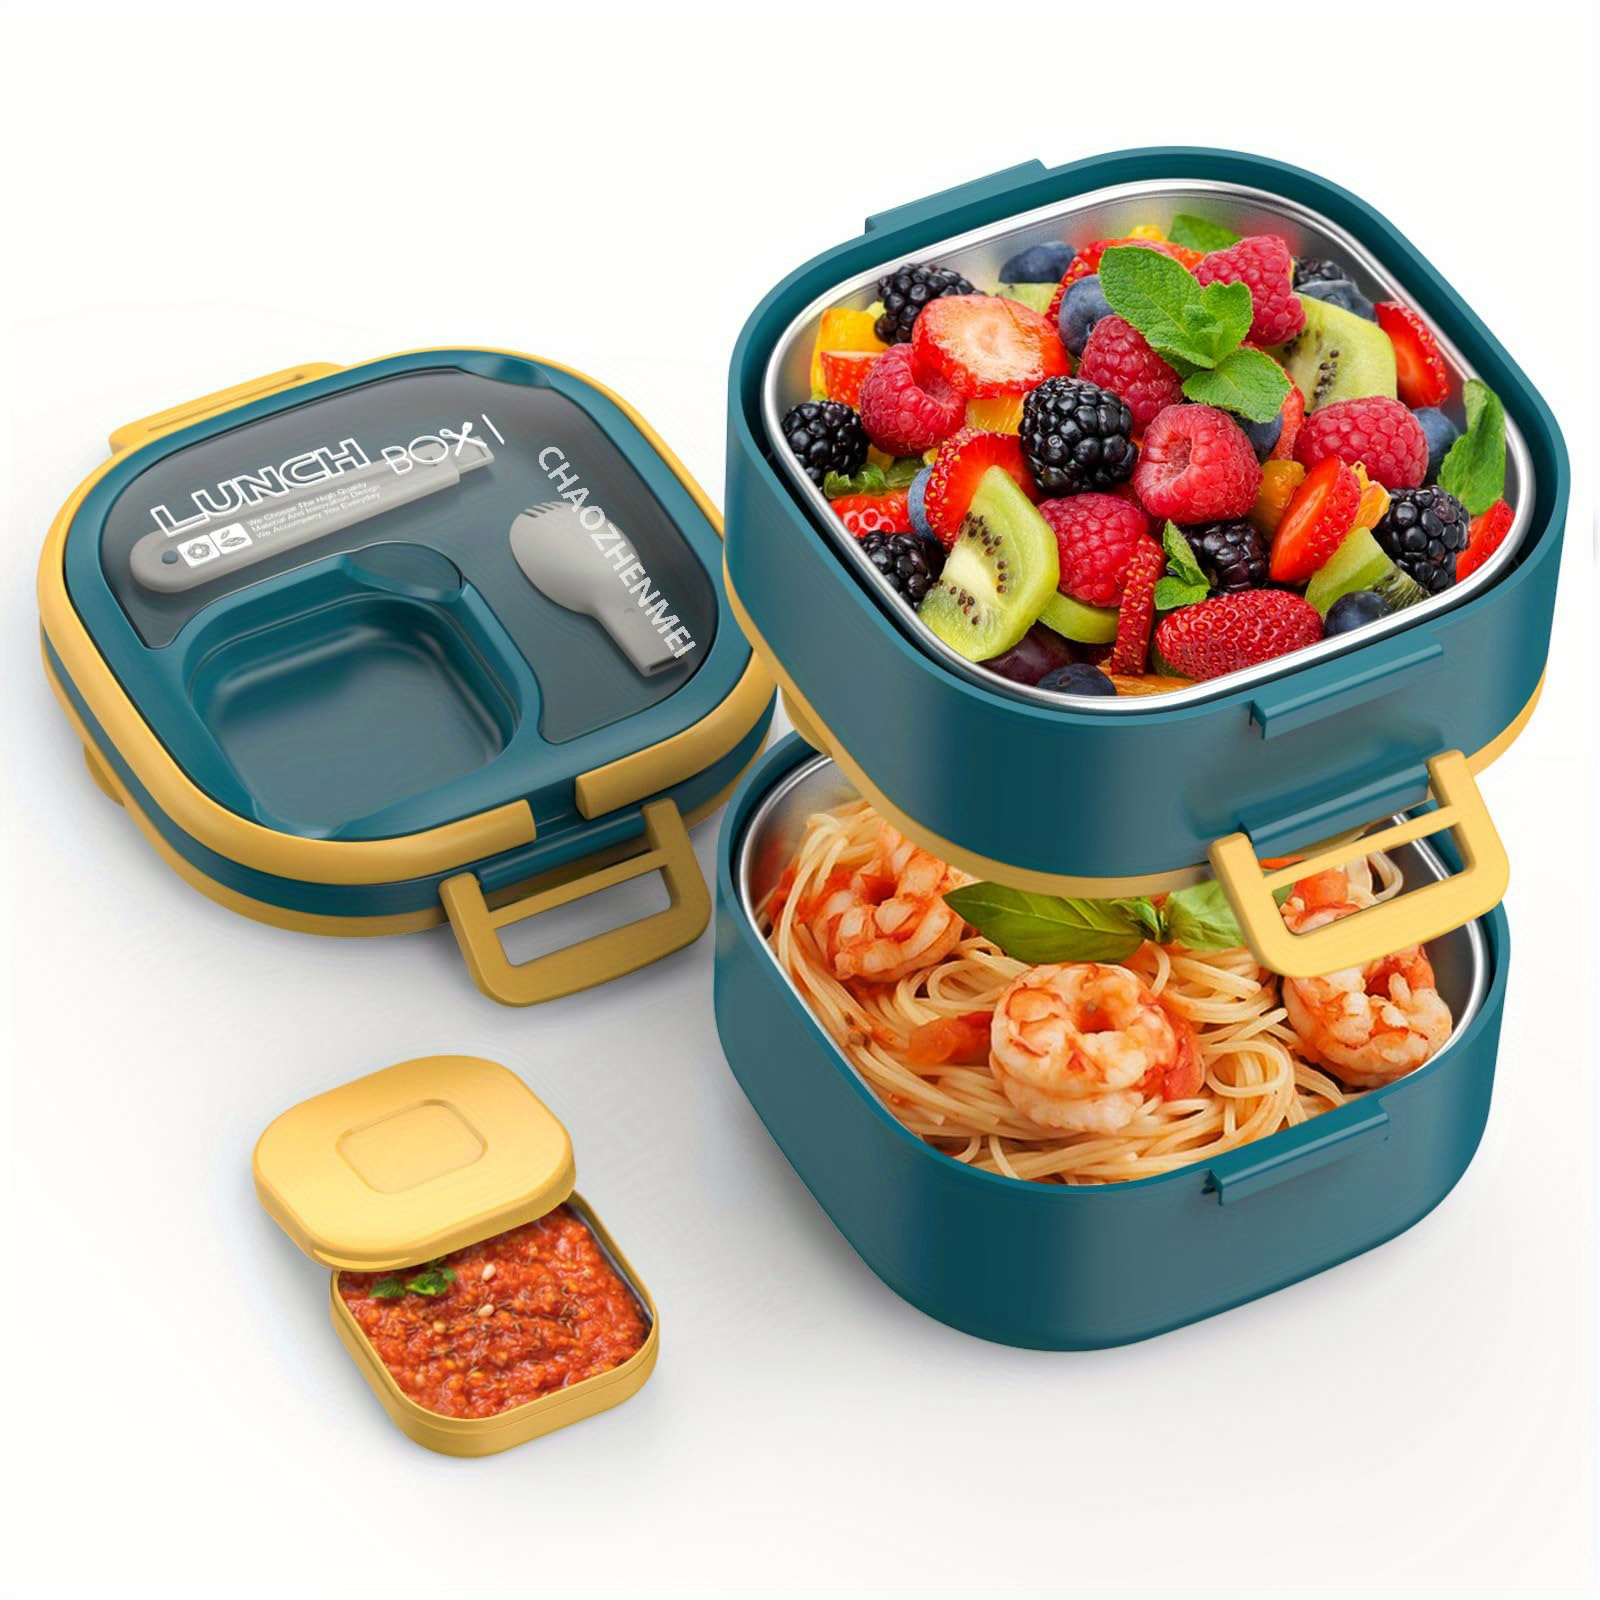 2 Layers Leakproof Bento Lunch Box with stainless steel silverware